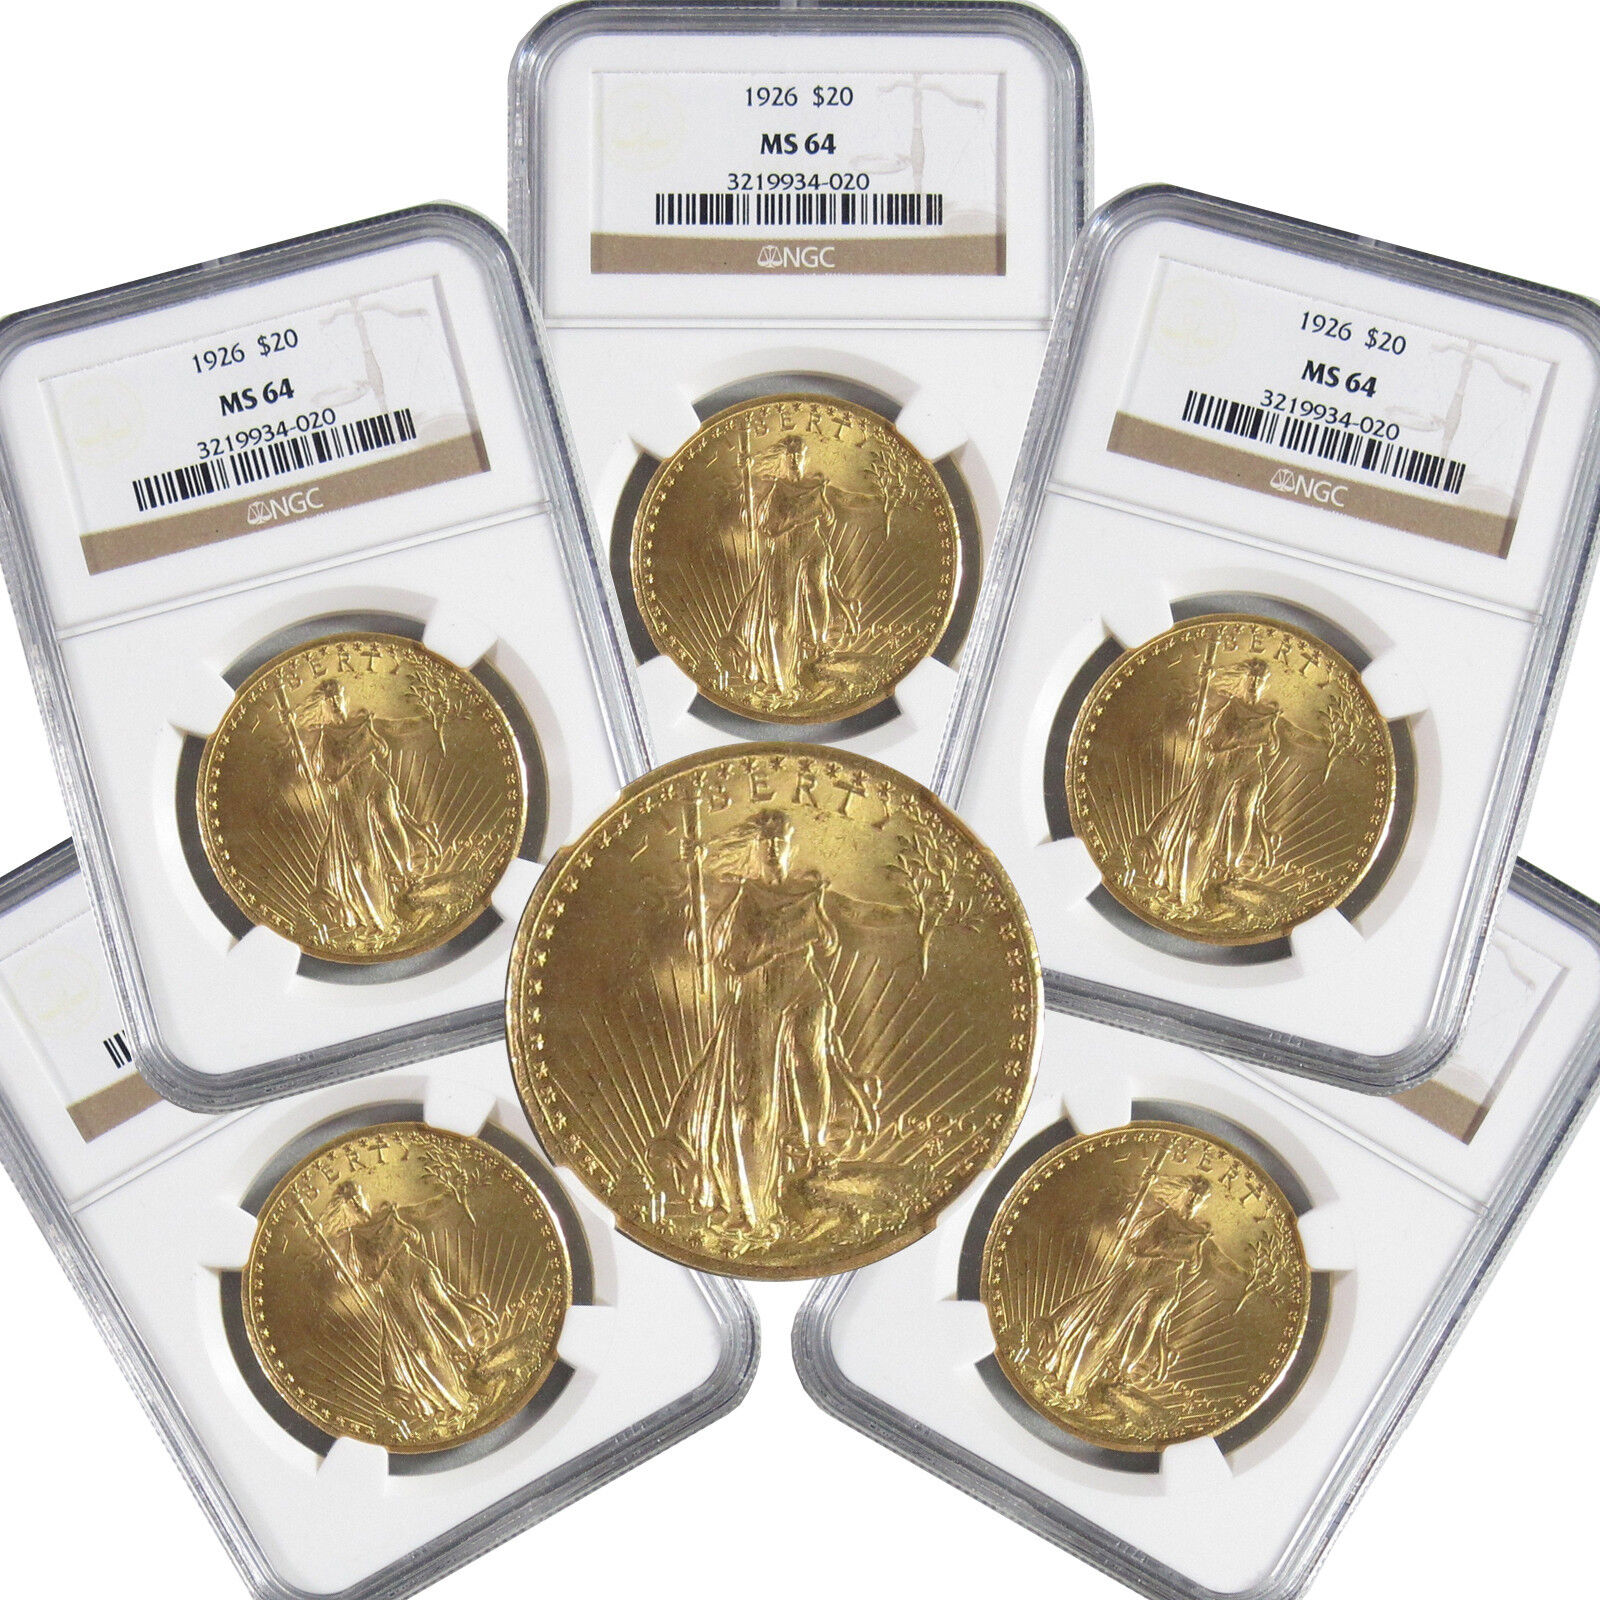 $20 St. Saint Gaudens Double Eagle Gold NGC MS64 Coin Weekend Special     *